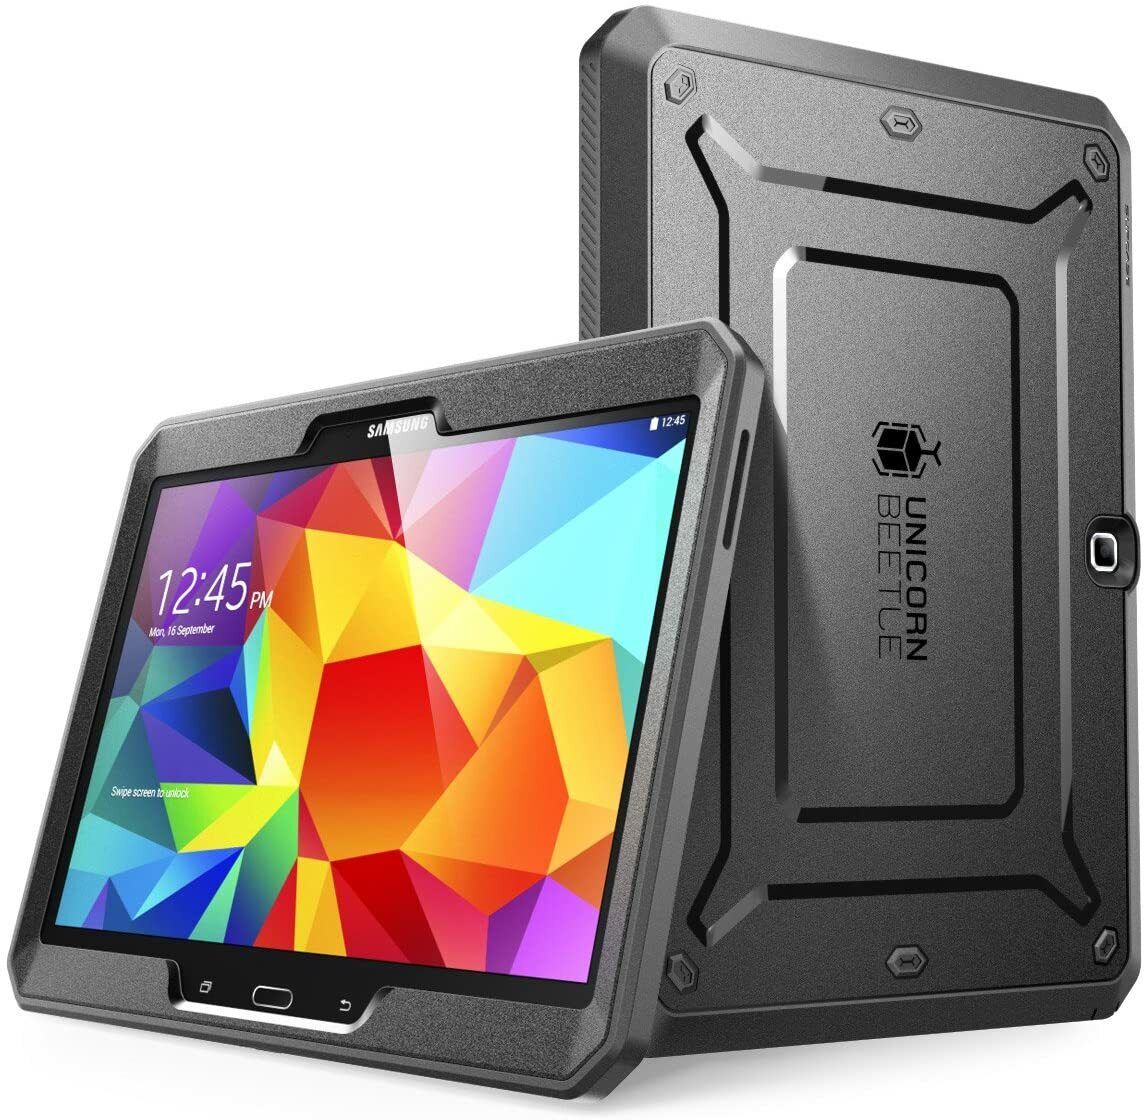 SUPCASE for Samsung Galaxy Tab 4 (10.1 inch) 2014 Screen Case Rugged Shell Cover